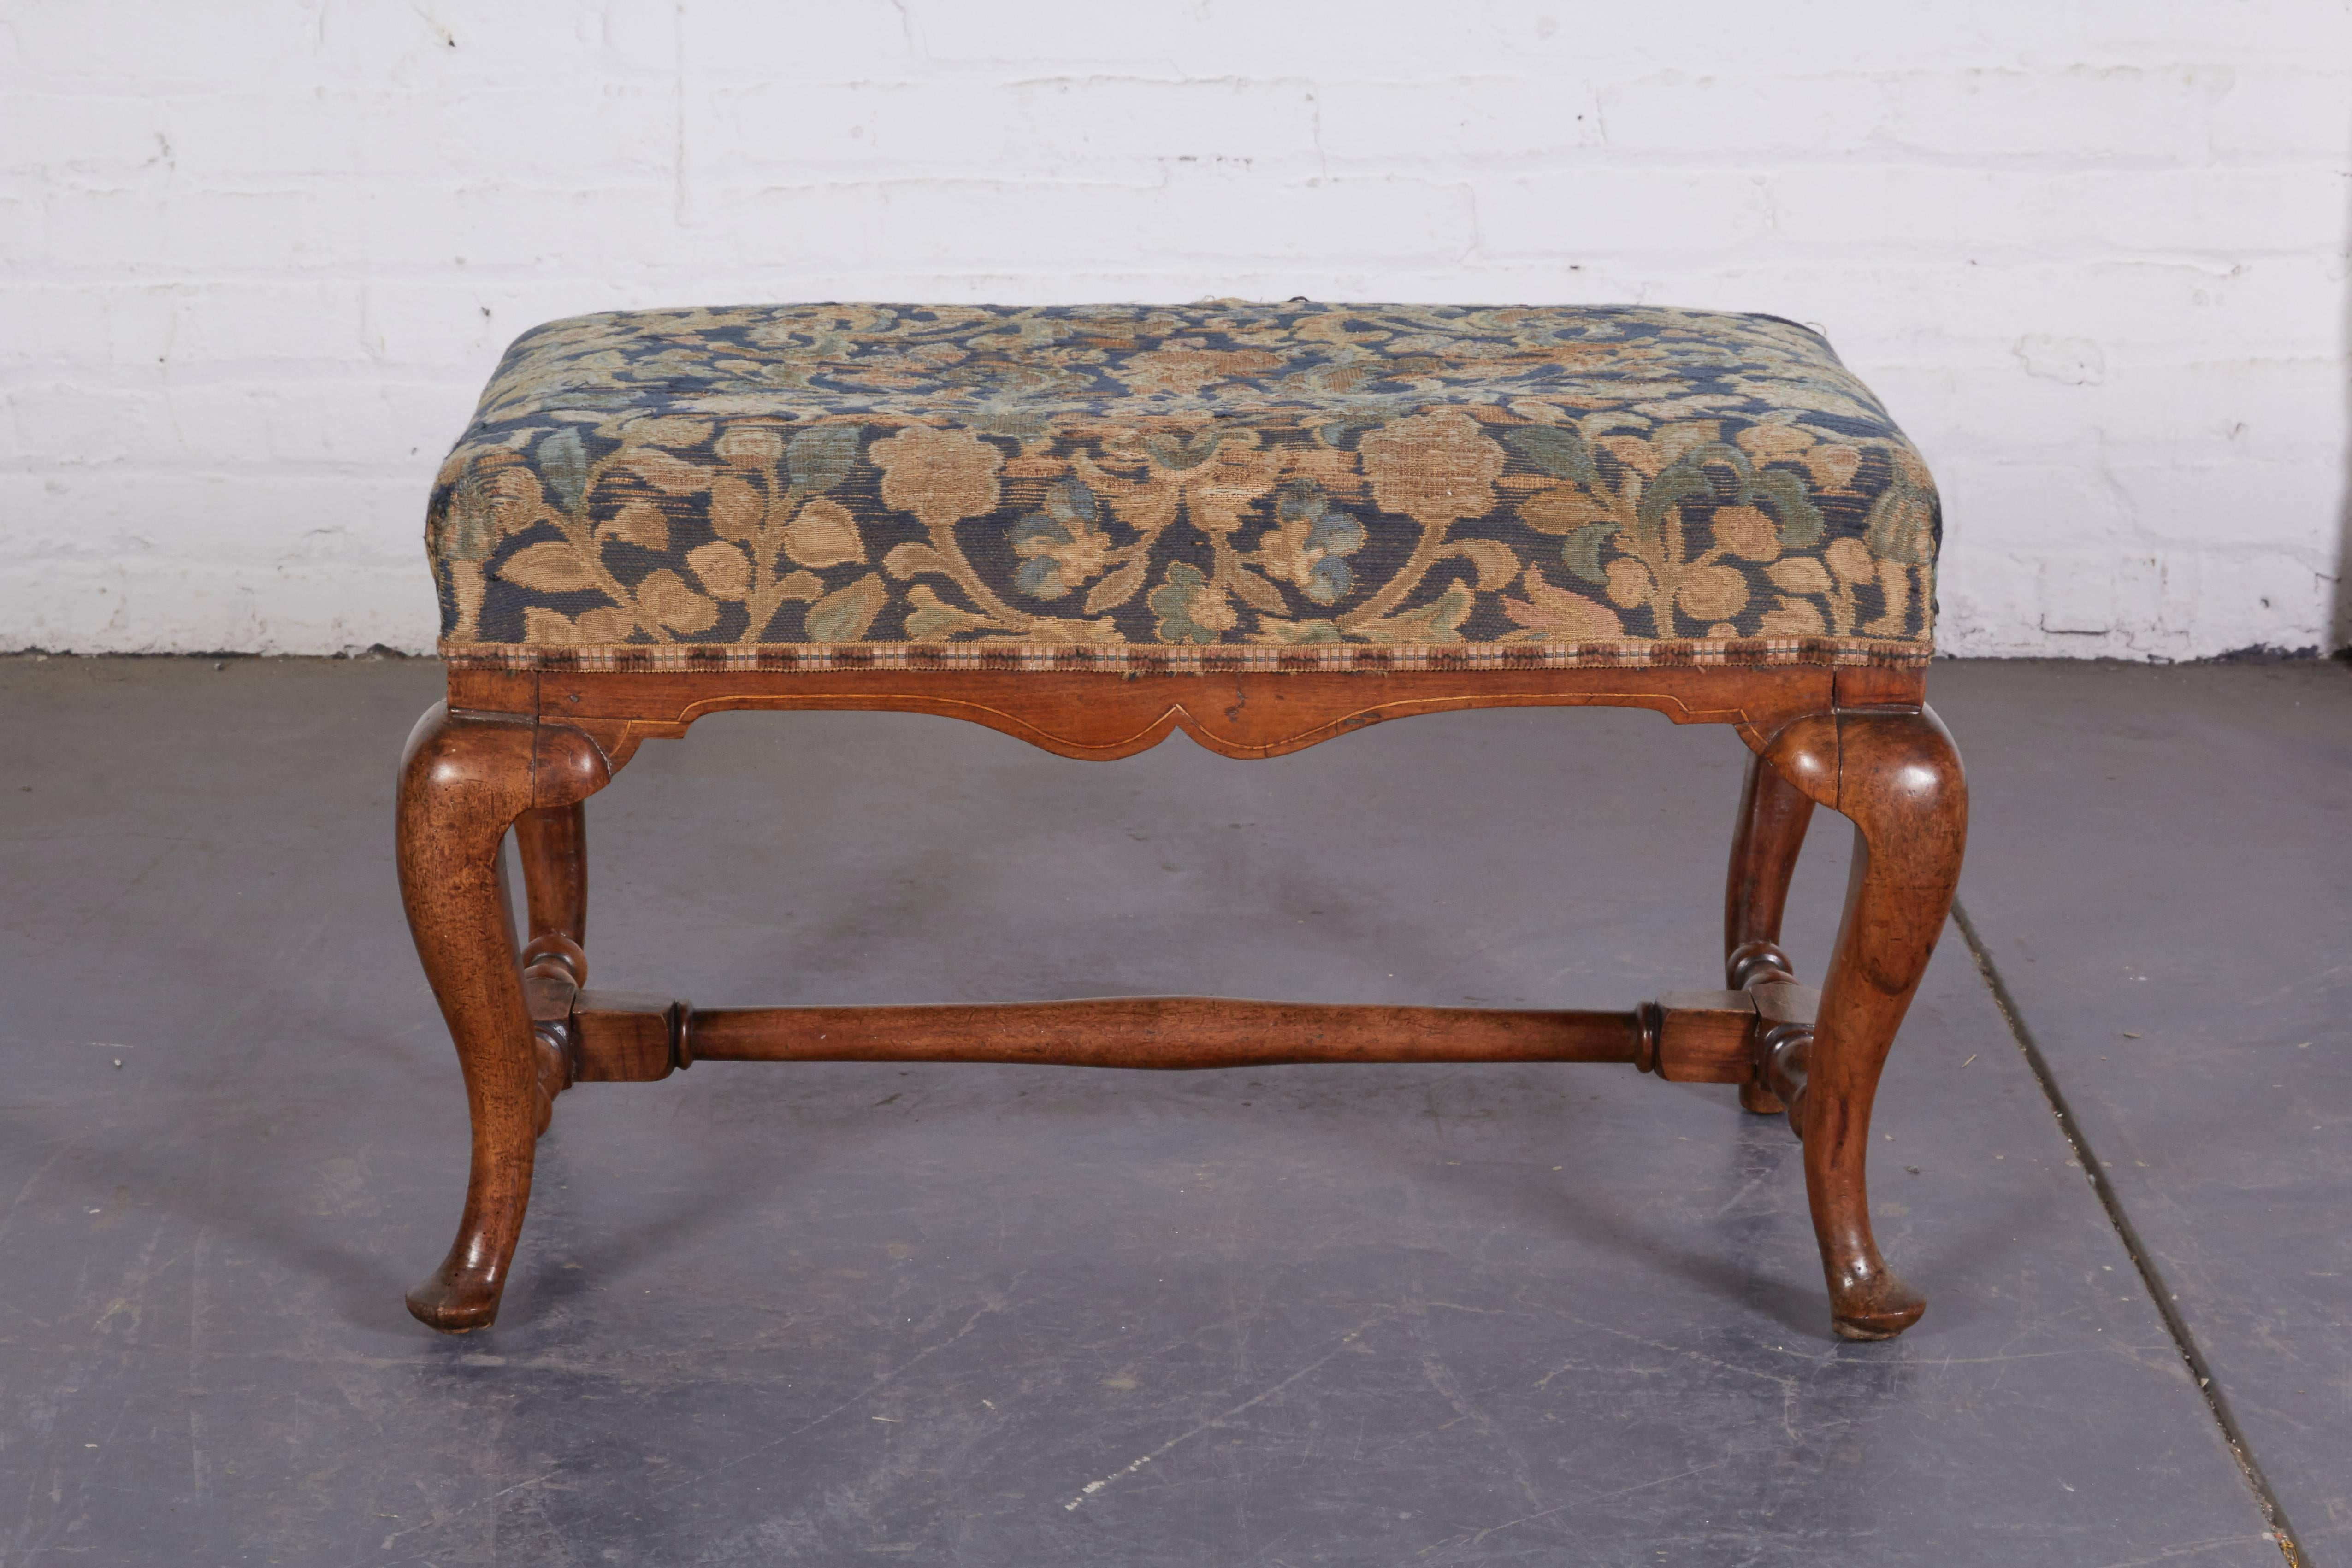 The rectangular seat upholstered in antique verdure textile, over the shaped seat rail; raised on cabriole legs joined by a turned H-form stretcher and terminating in pad feet. Upholstery is fragile - small area of wear seen in photo can be repaired.